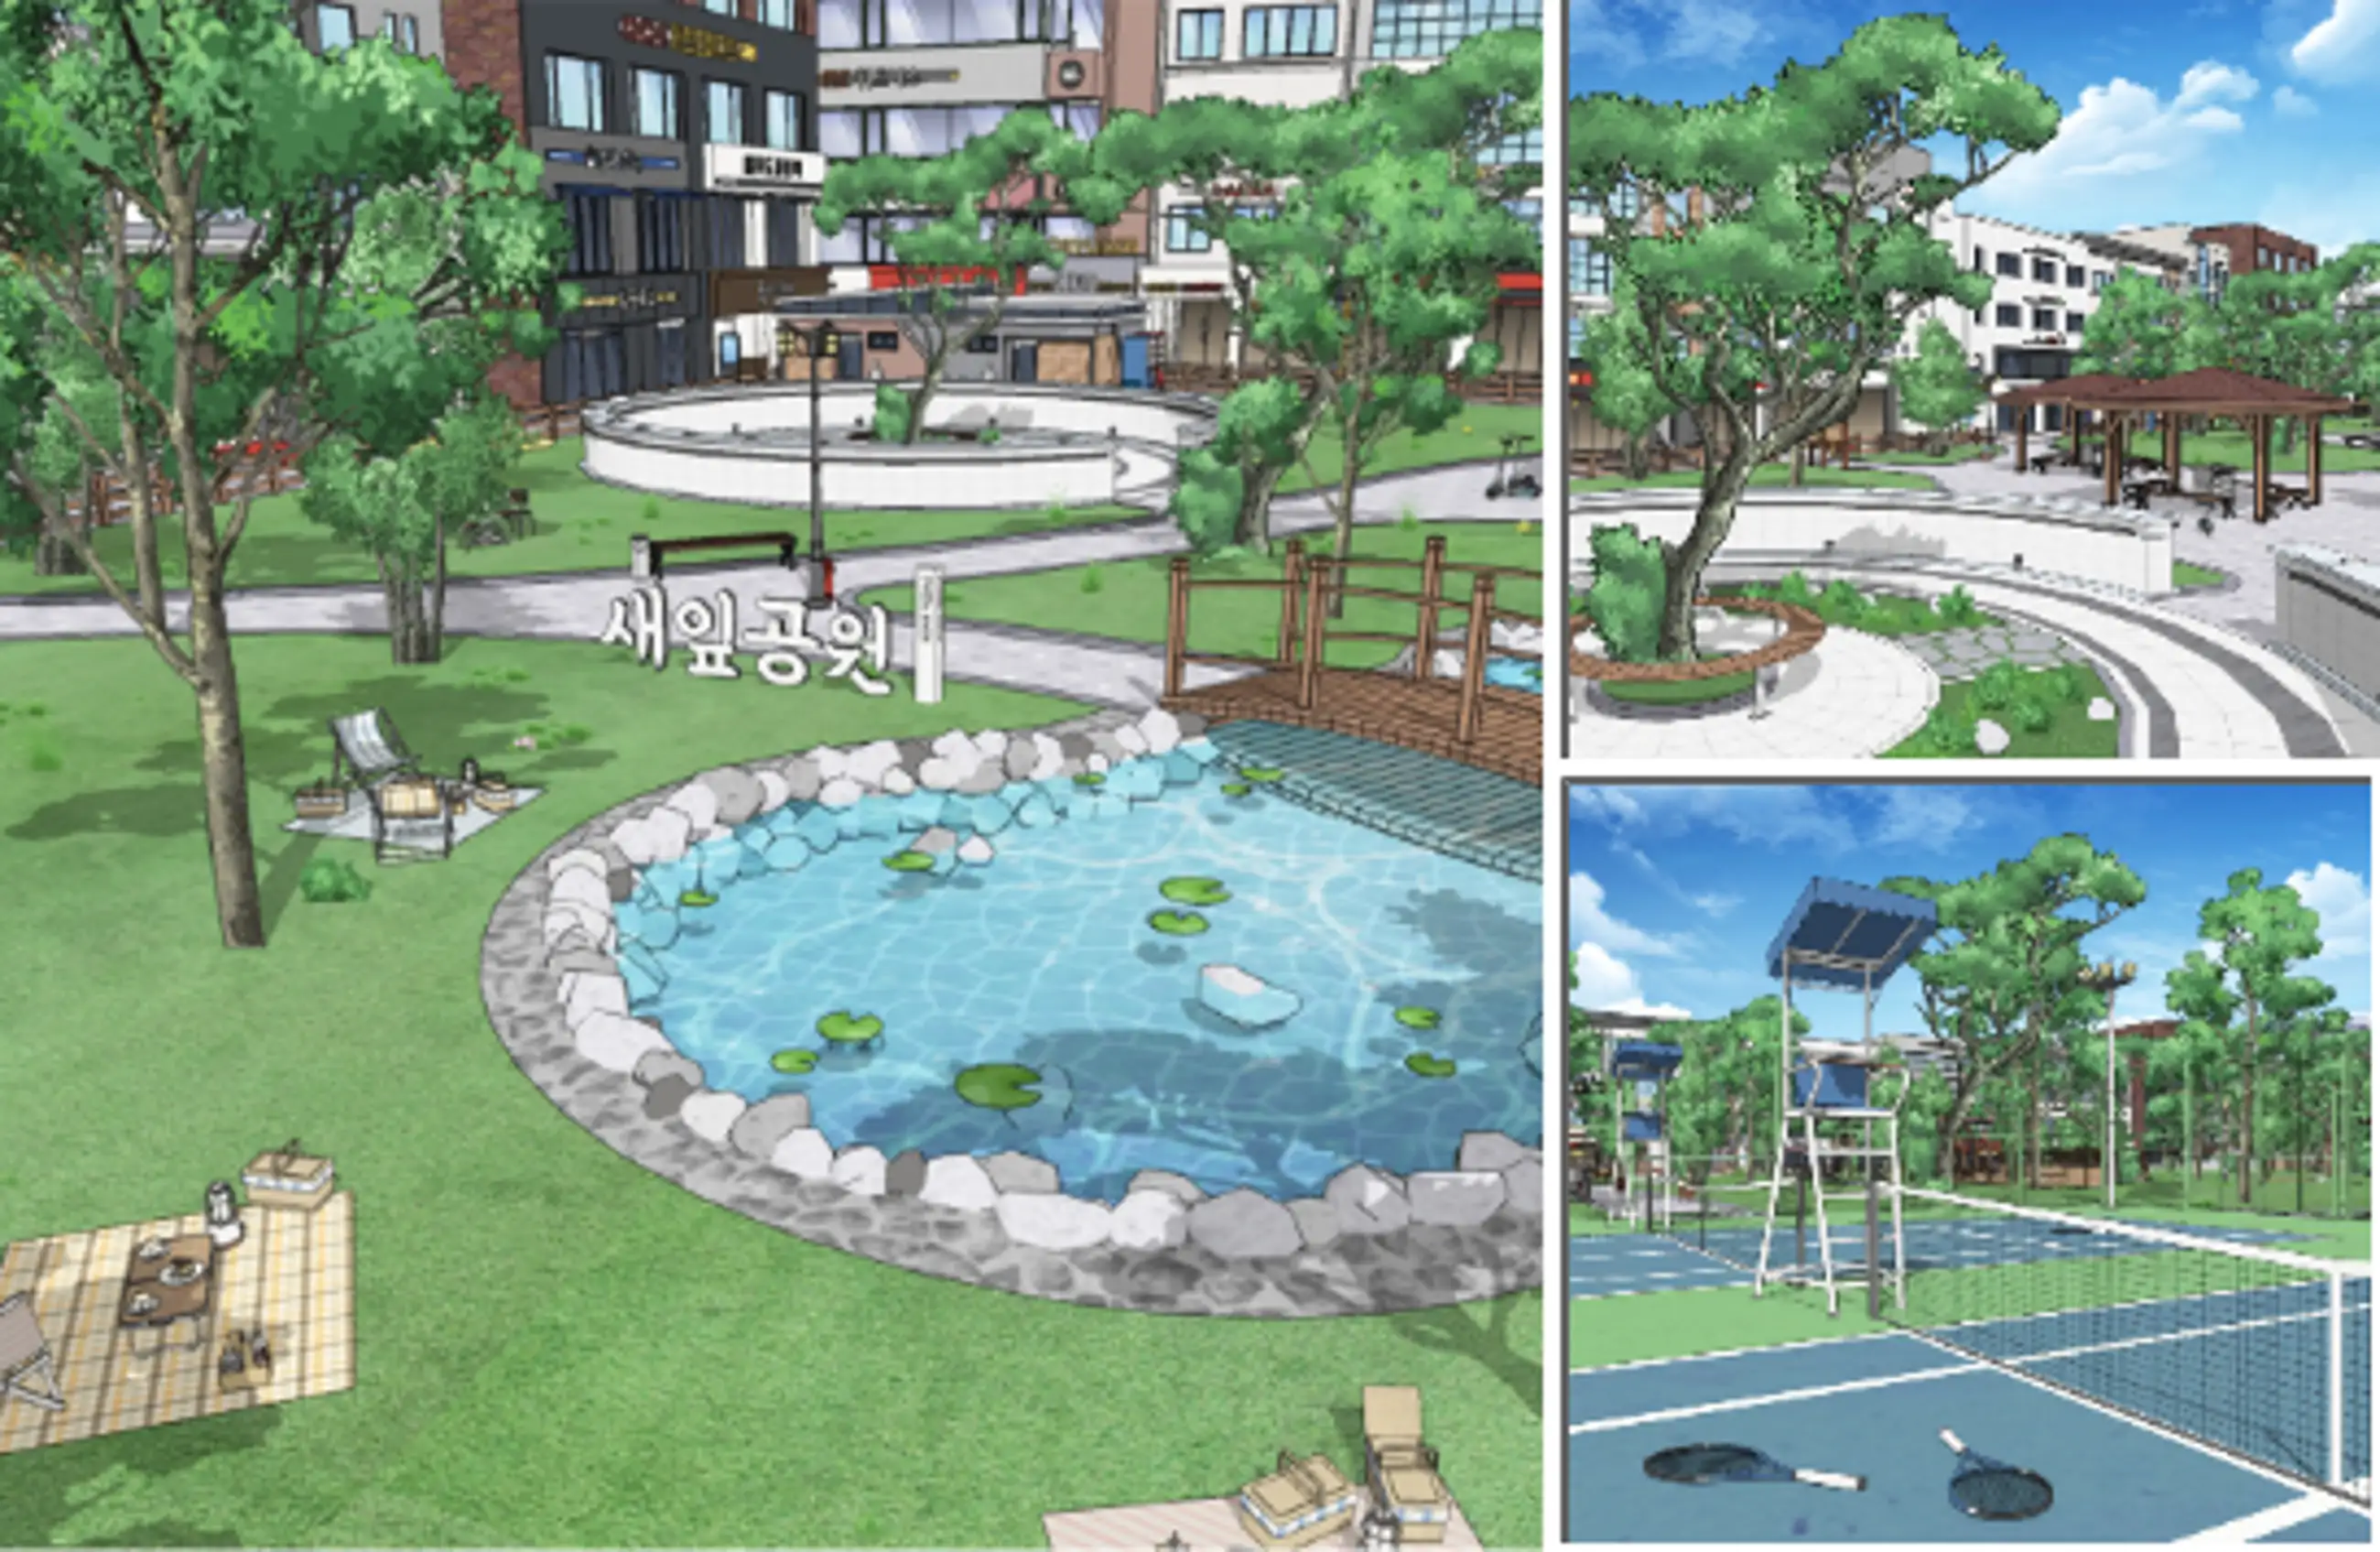 Tennis court & basketball court & small stage & fountain park - Daytime